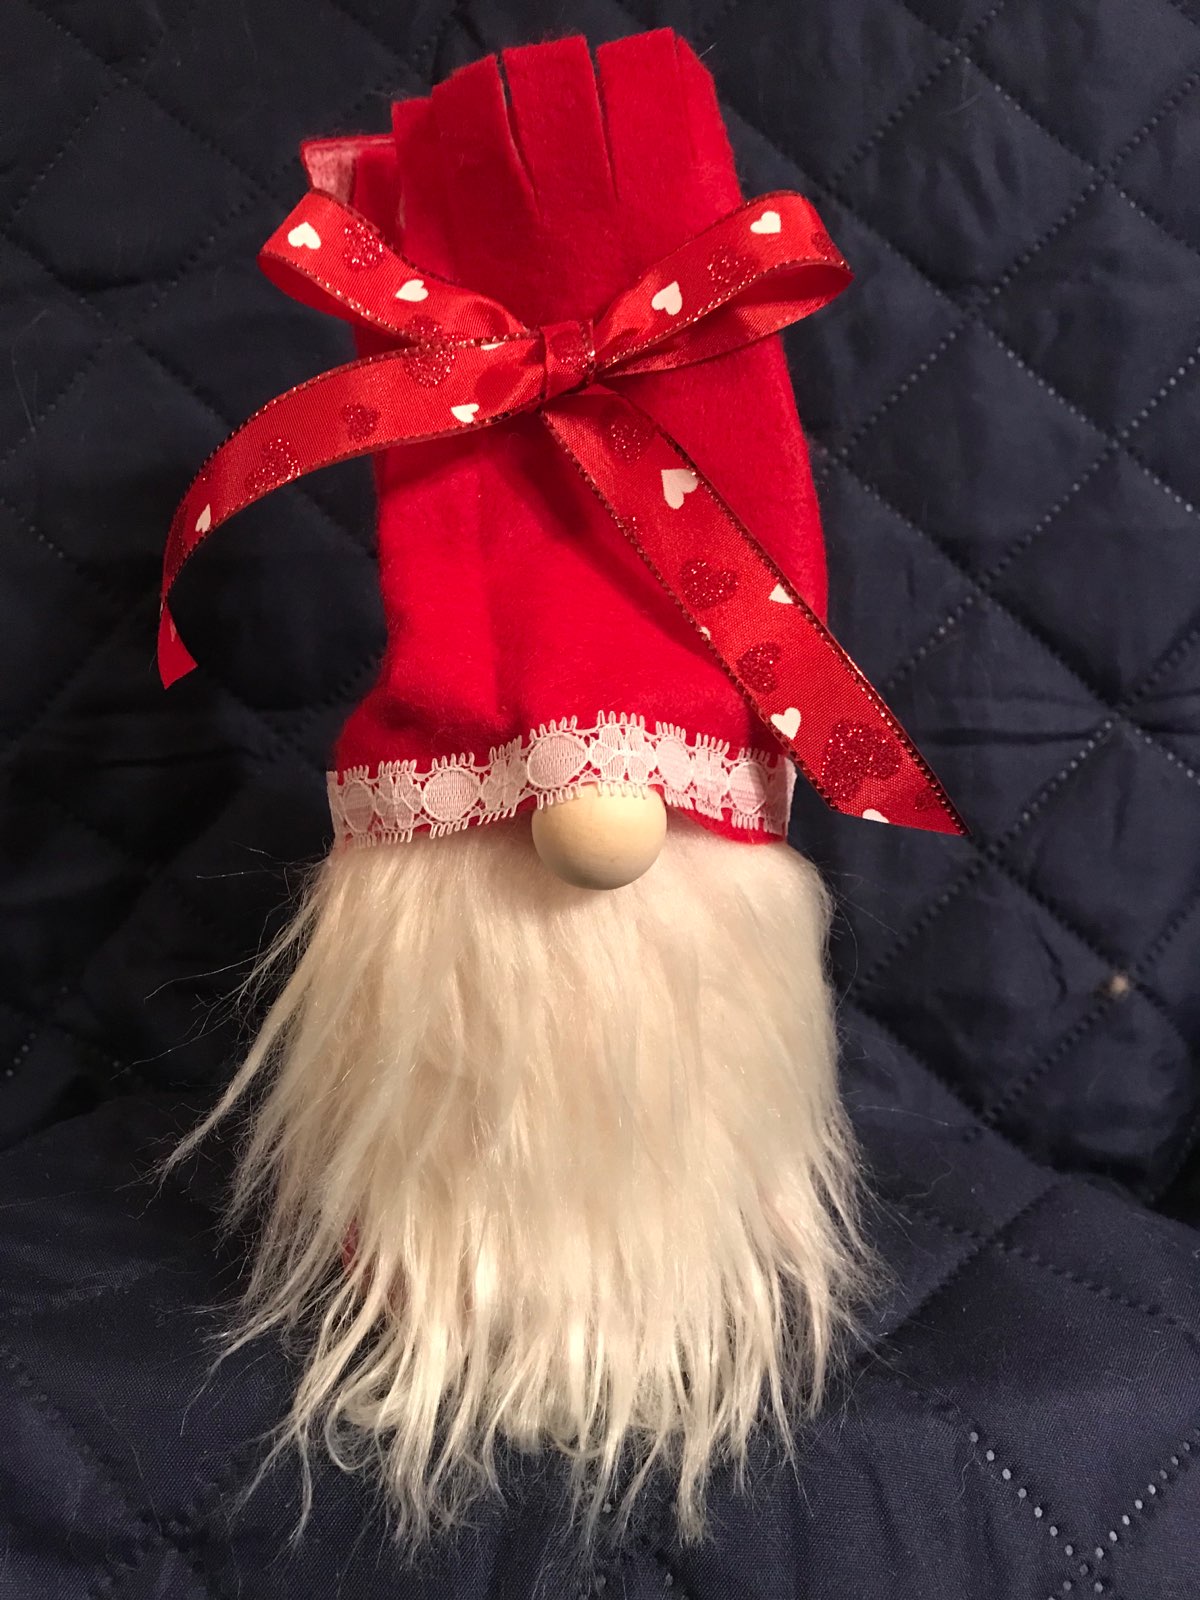 Valentine Treat holder Gnome - $18Email if interested!